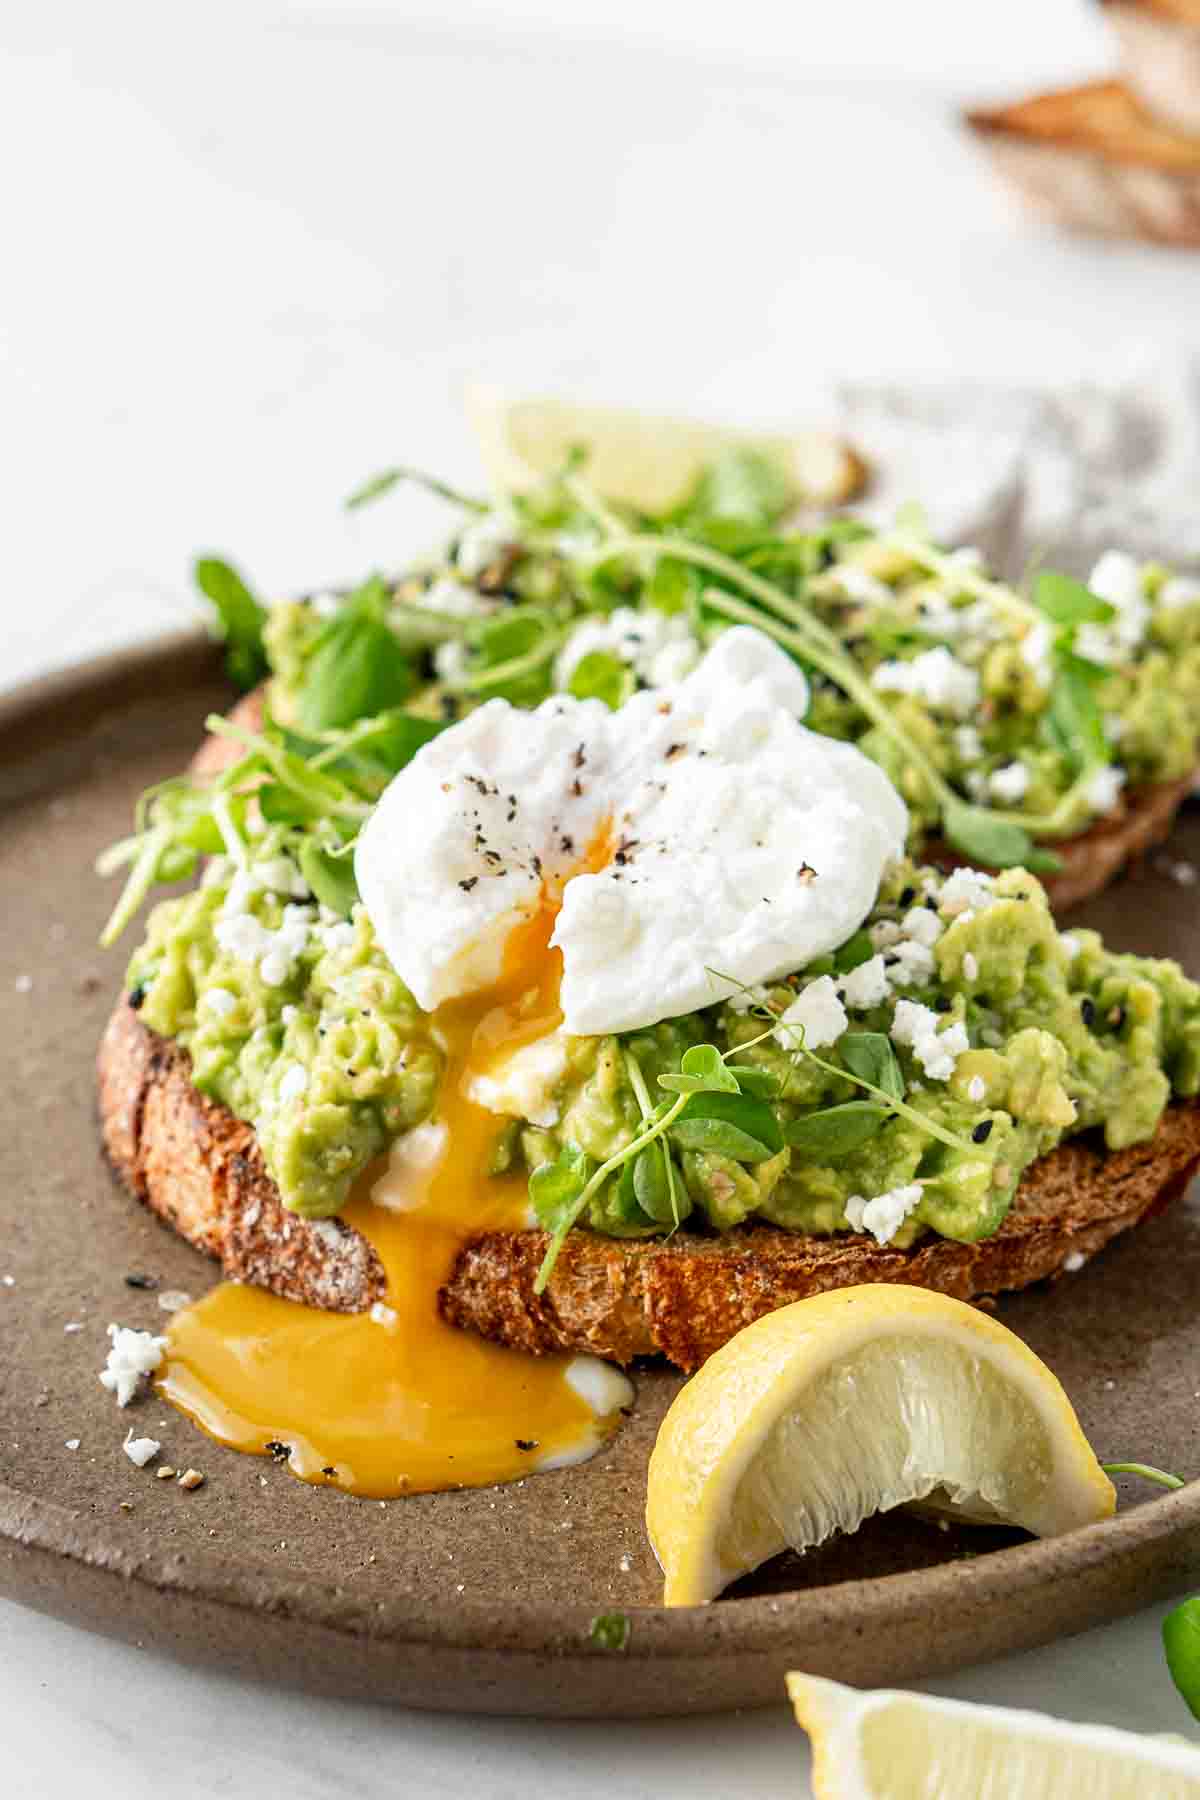 Poached egg on top of avocado toast.